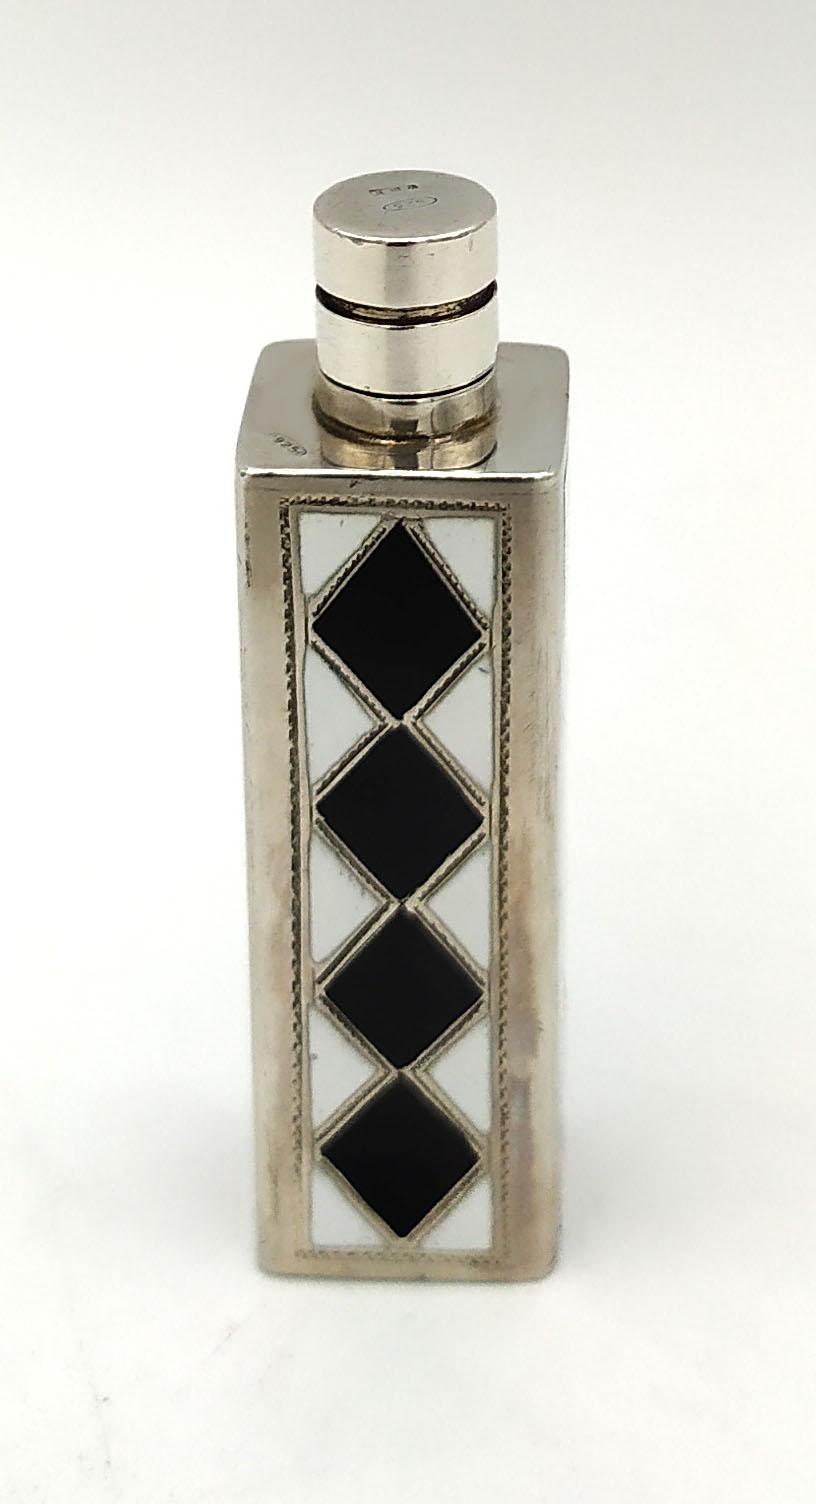 This exclusive handbag perfume holder is in 925/1000 sterling silver.
it has a fine geometric manual engraving with rhombuses and white and black in Art Deco for the fire enameled surface.
Black and white handbag perfume holder has a natural silver